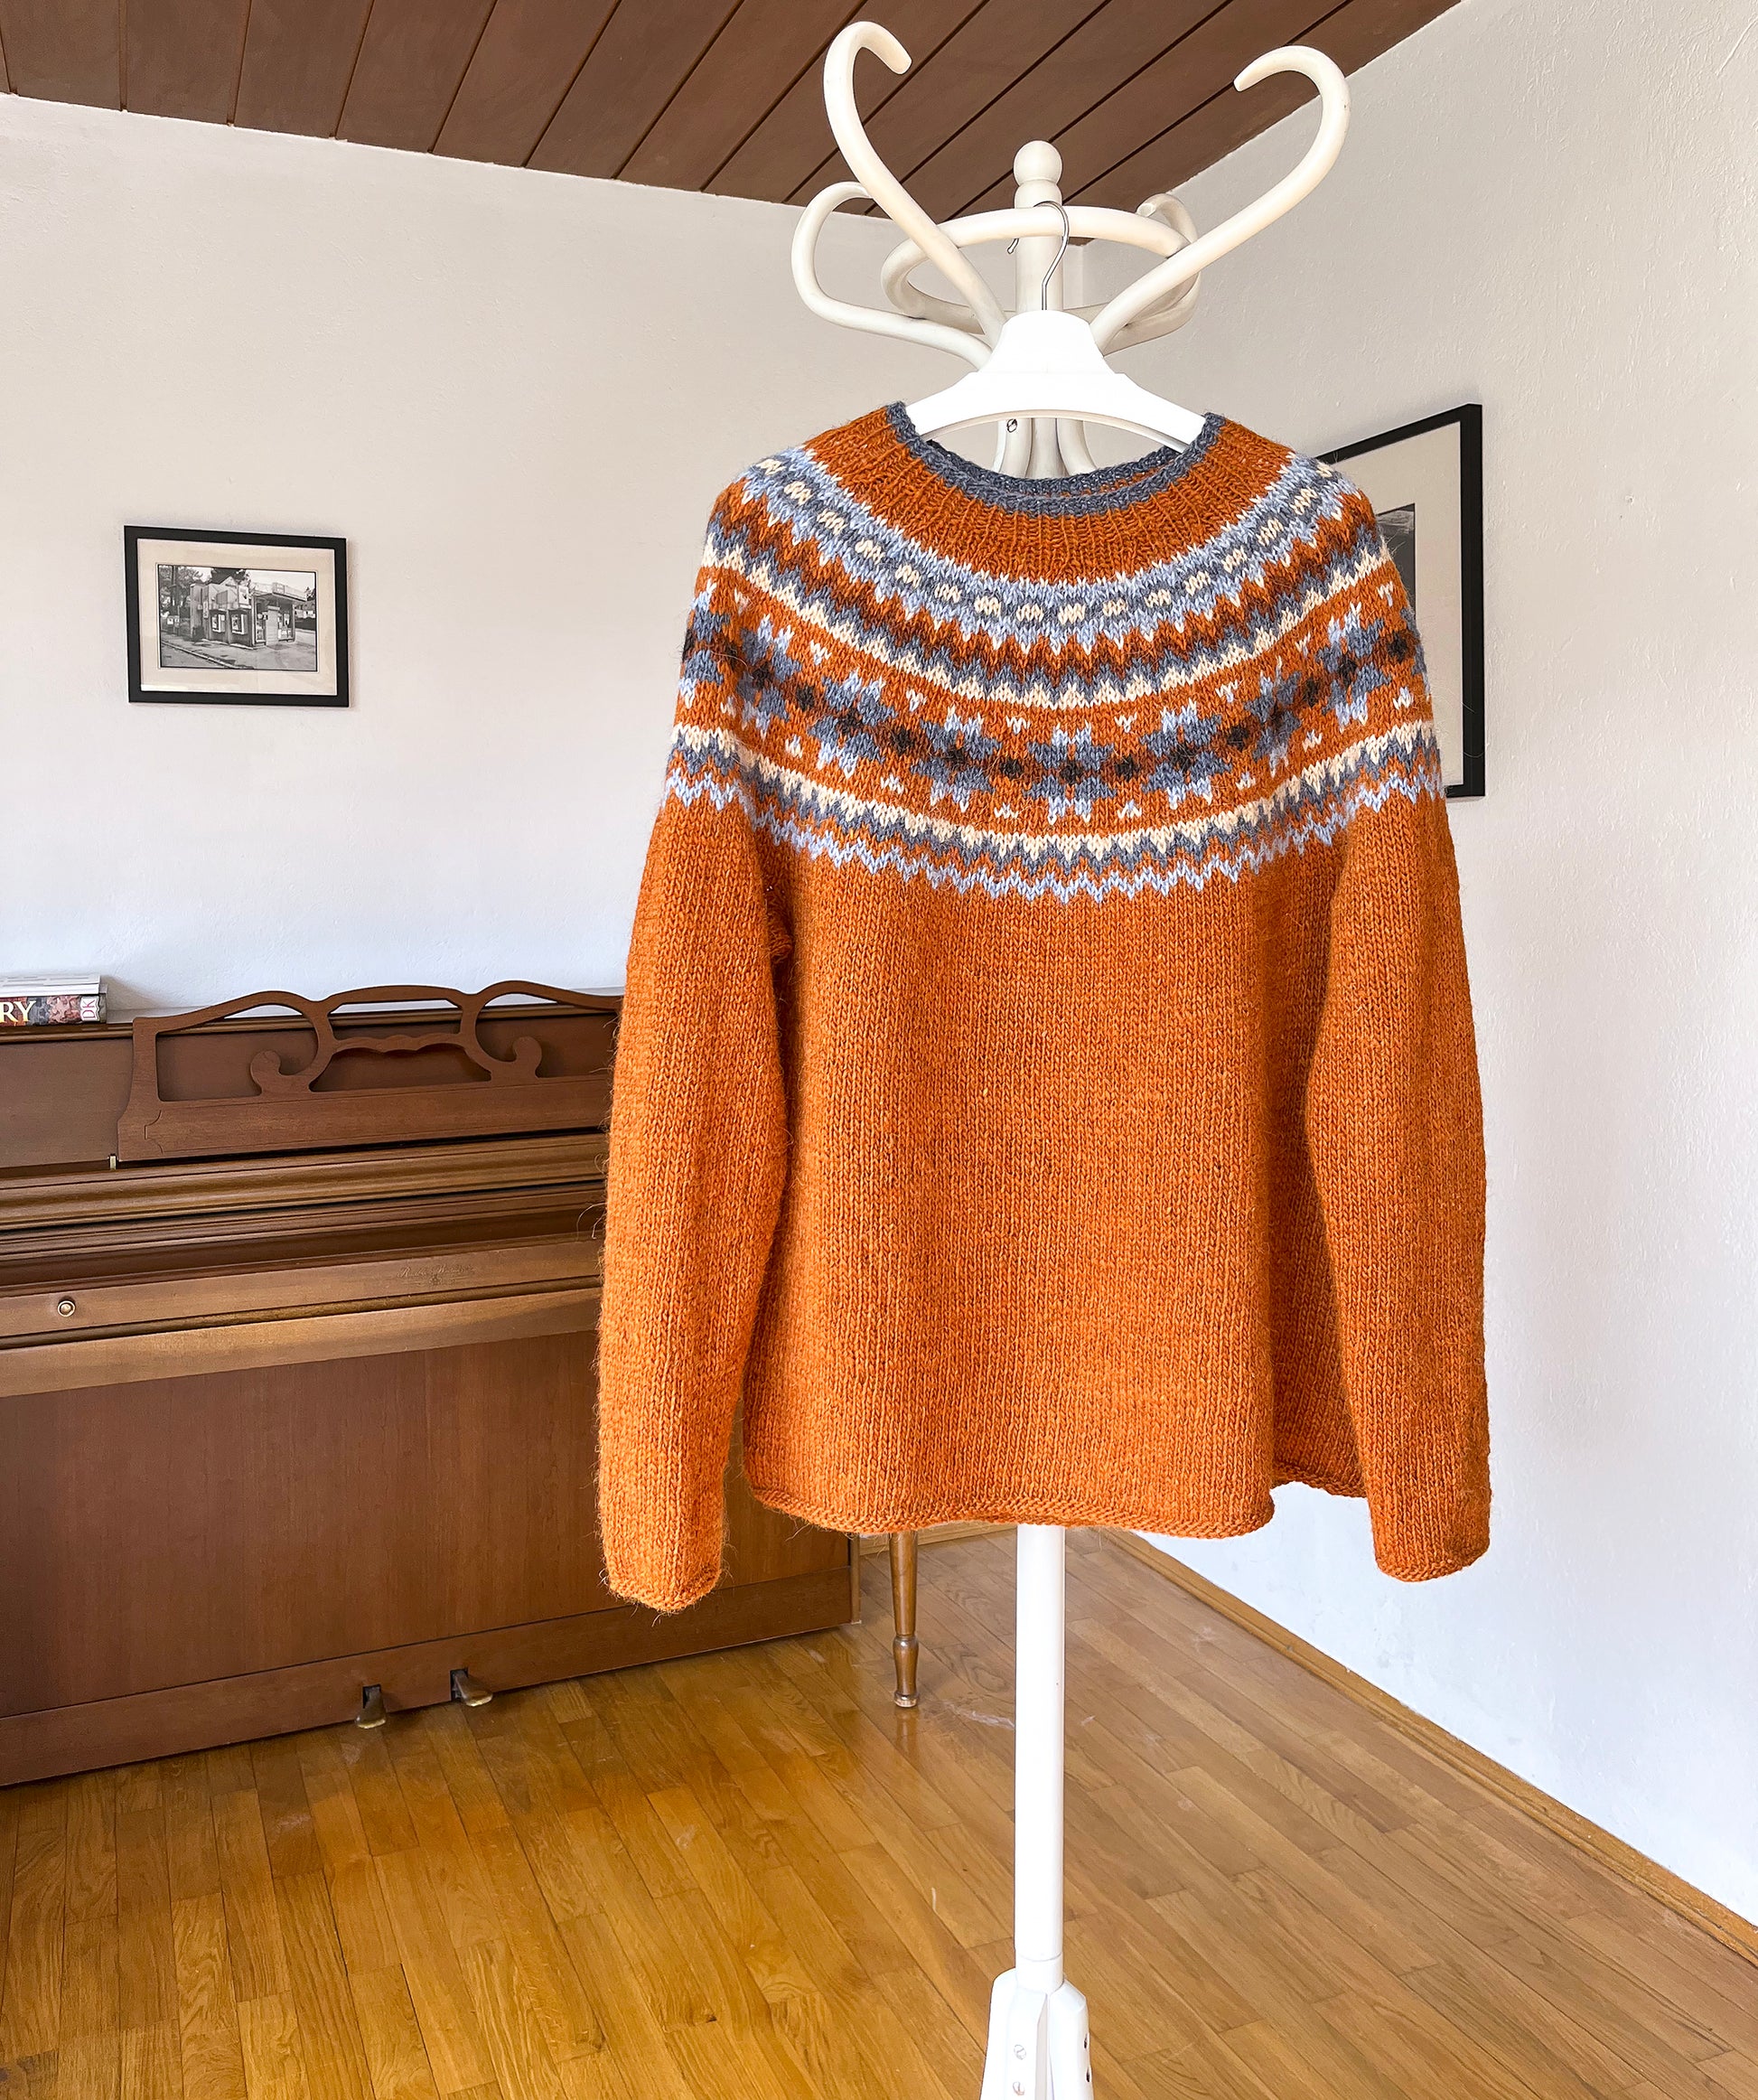 Orange and blue Icelandic lopapeysa knitted sweater from Lettlopi pure Icelandic wool in Rósir design